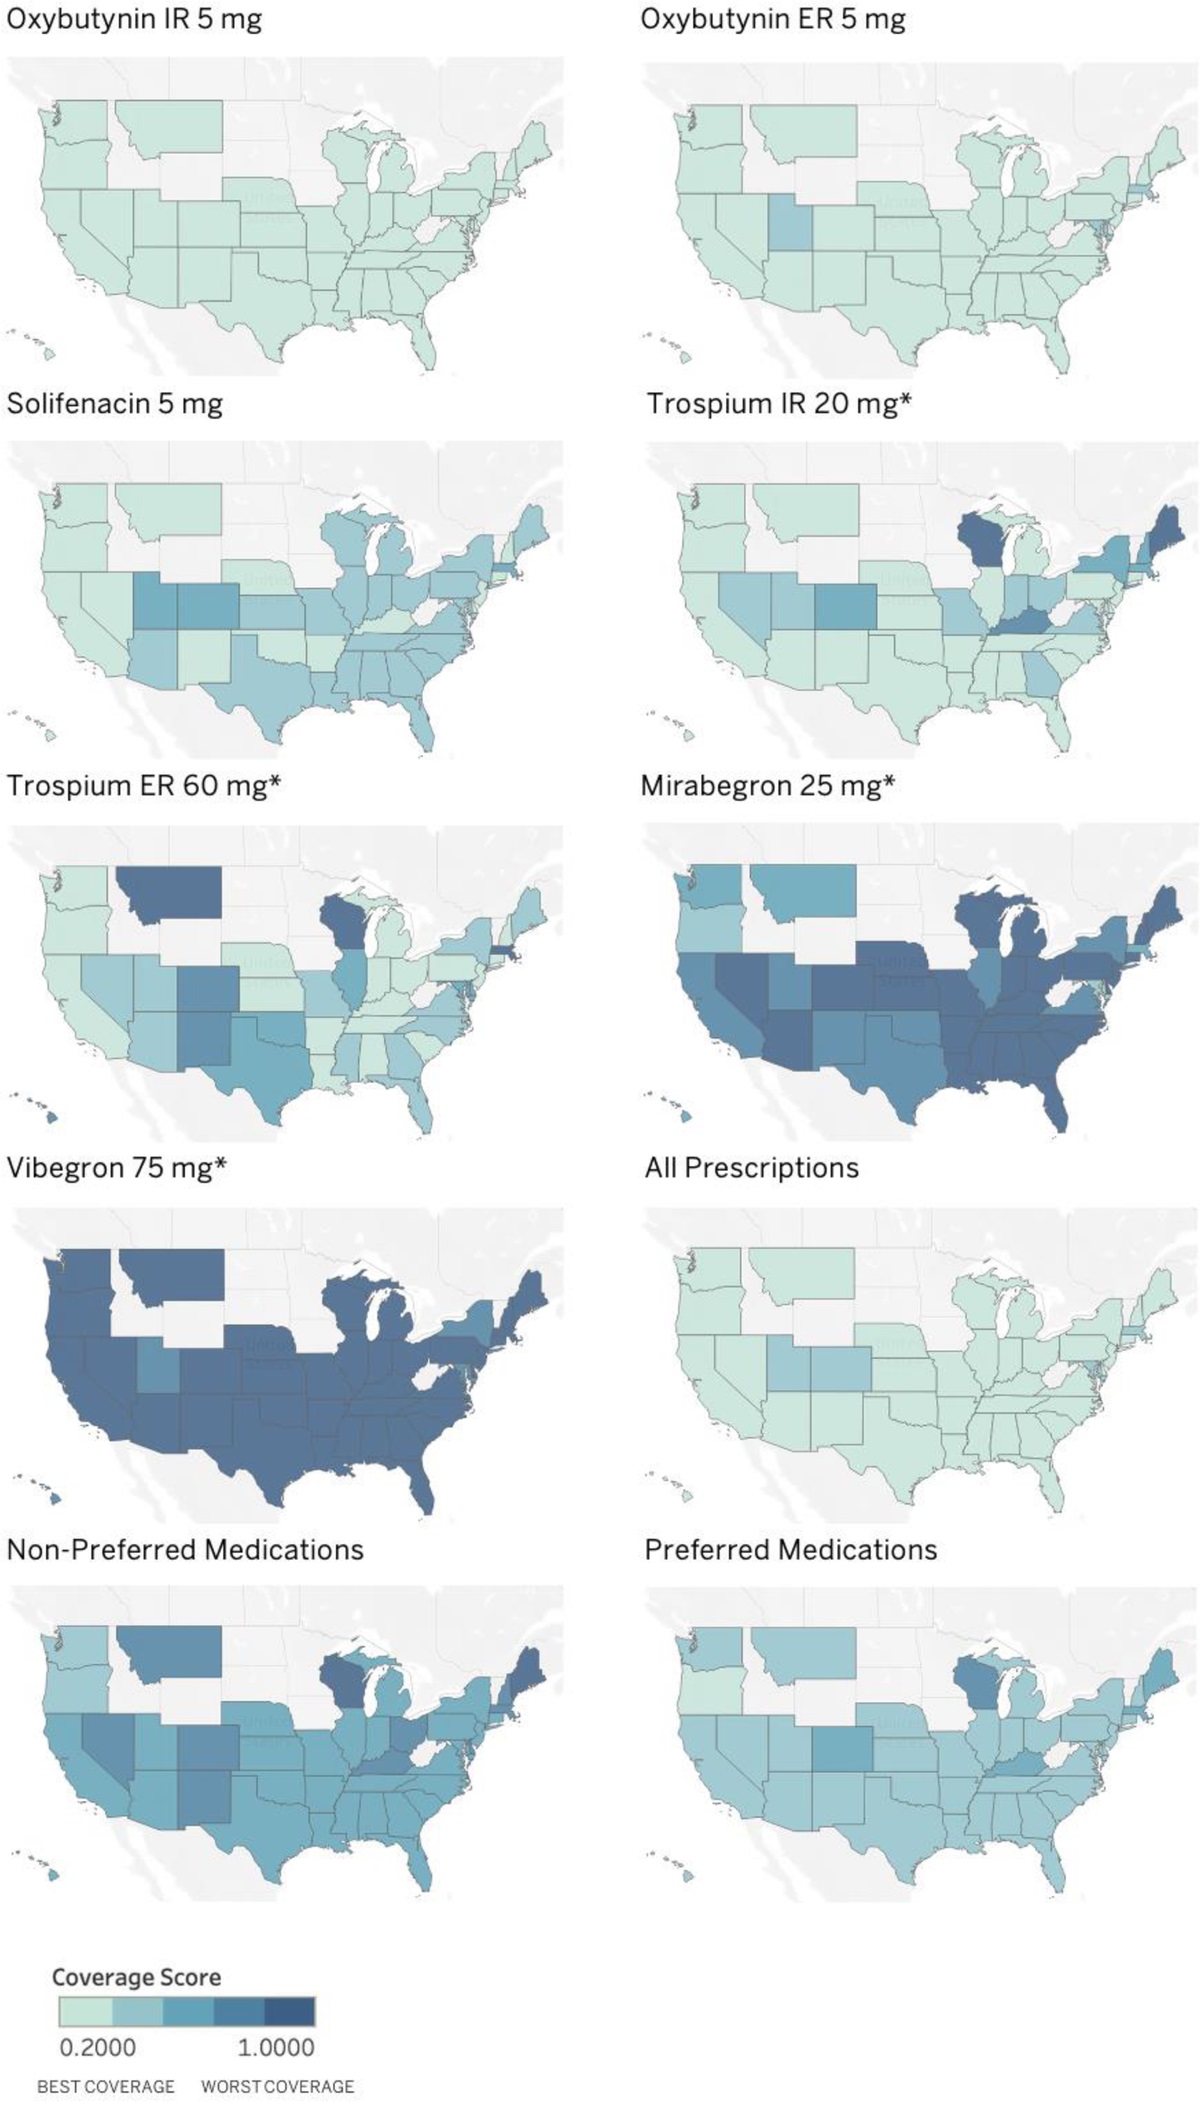 A Comparison of U.S. Individual and Family Plan Medication Coverage for Overactive Bladder